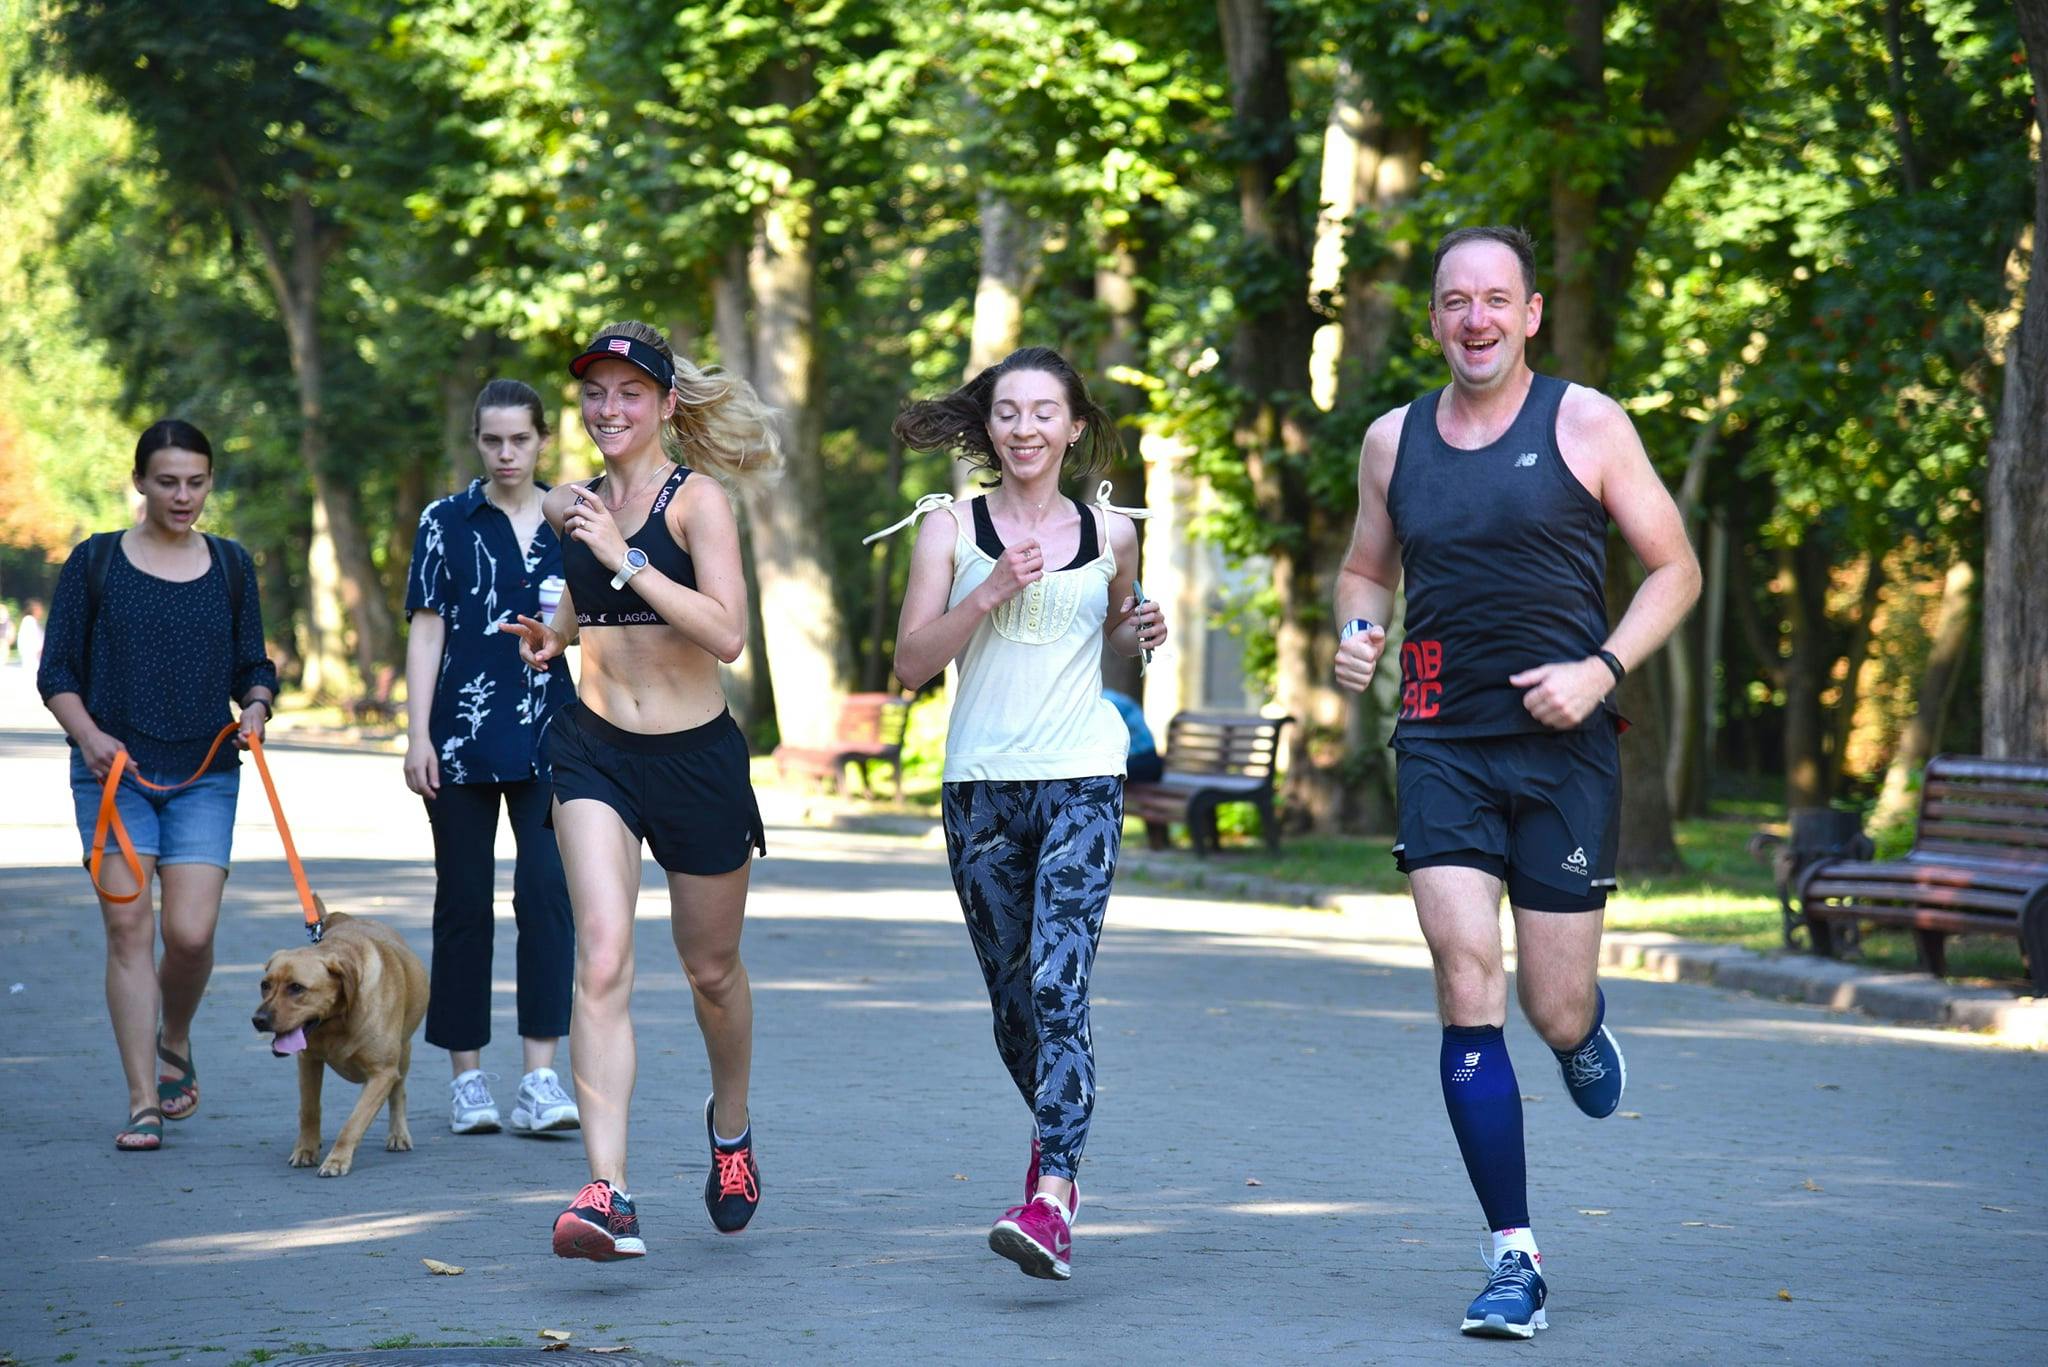 In the picture: three participants of the Runday run smiling through the park, avoiding pedestrians